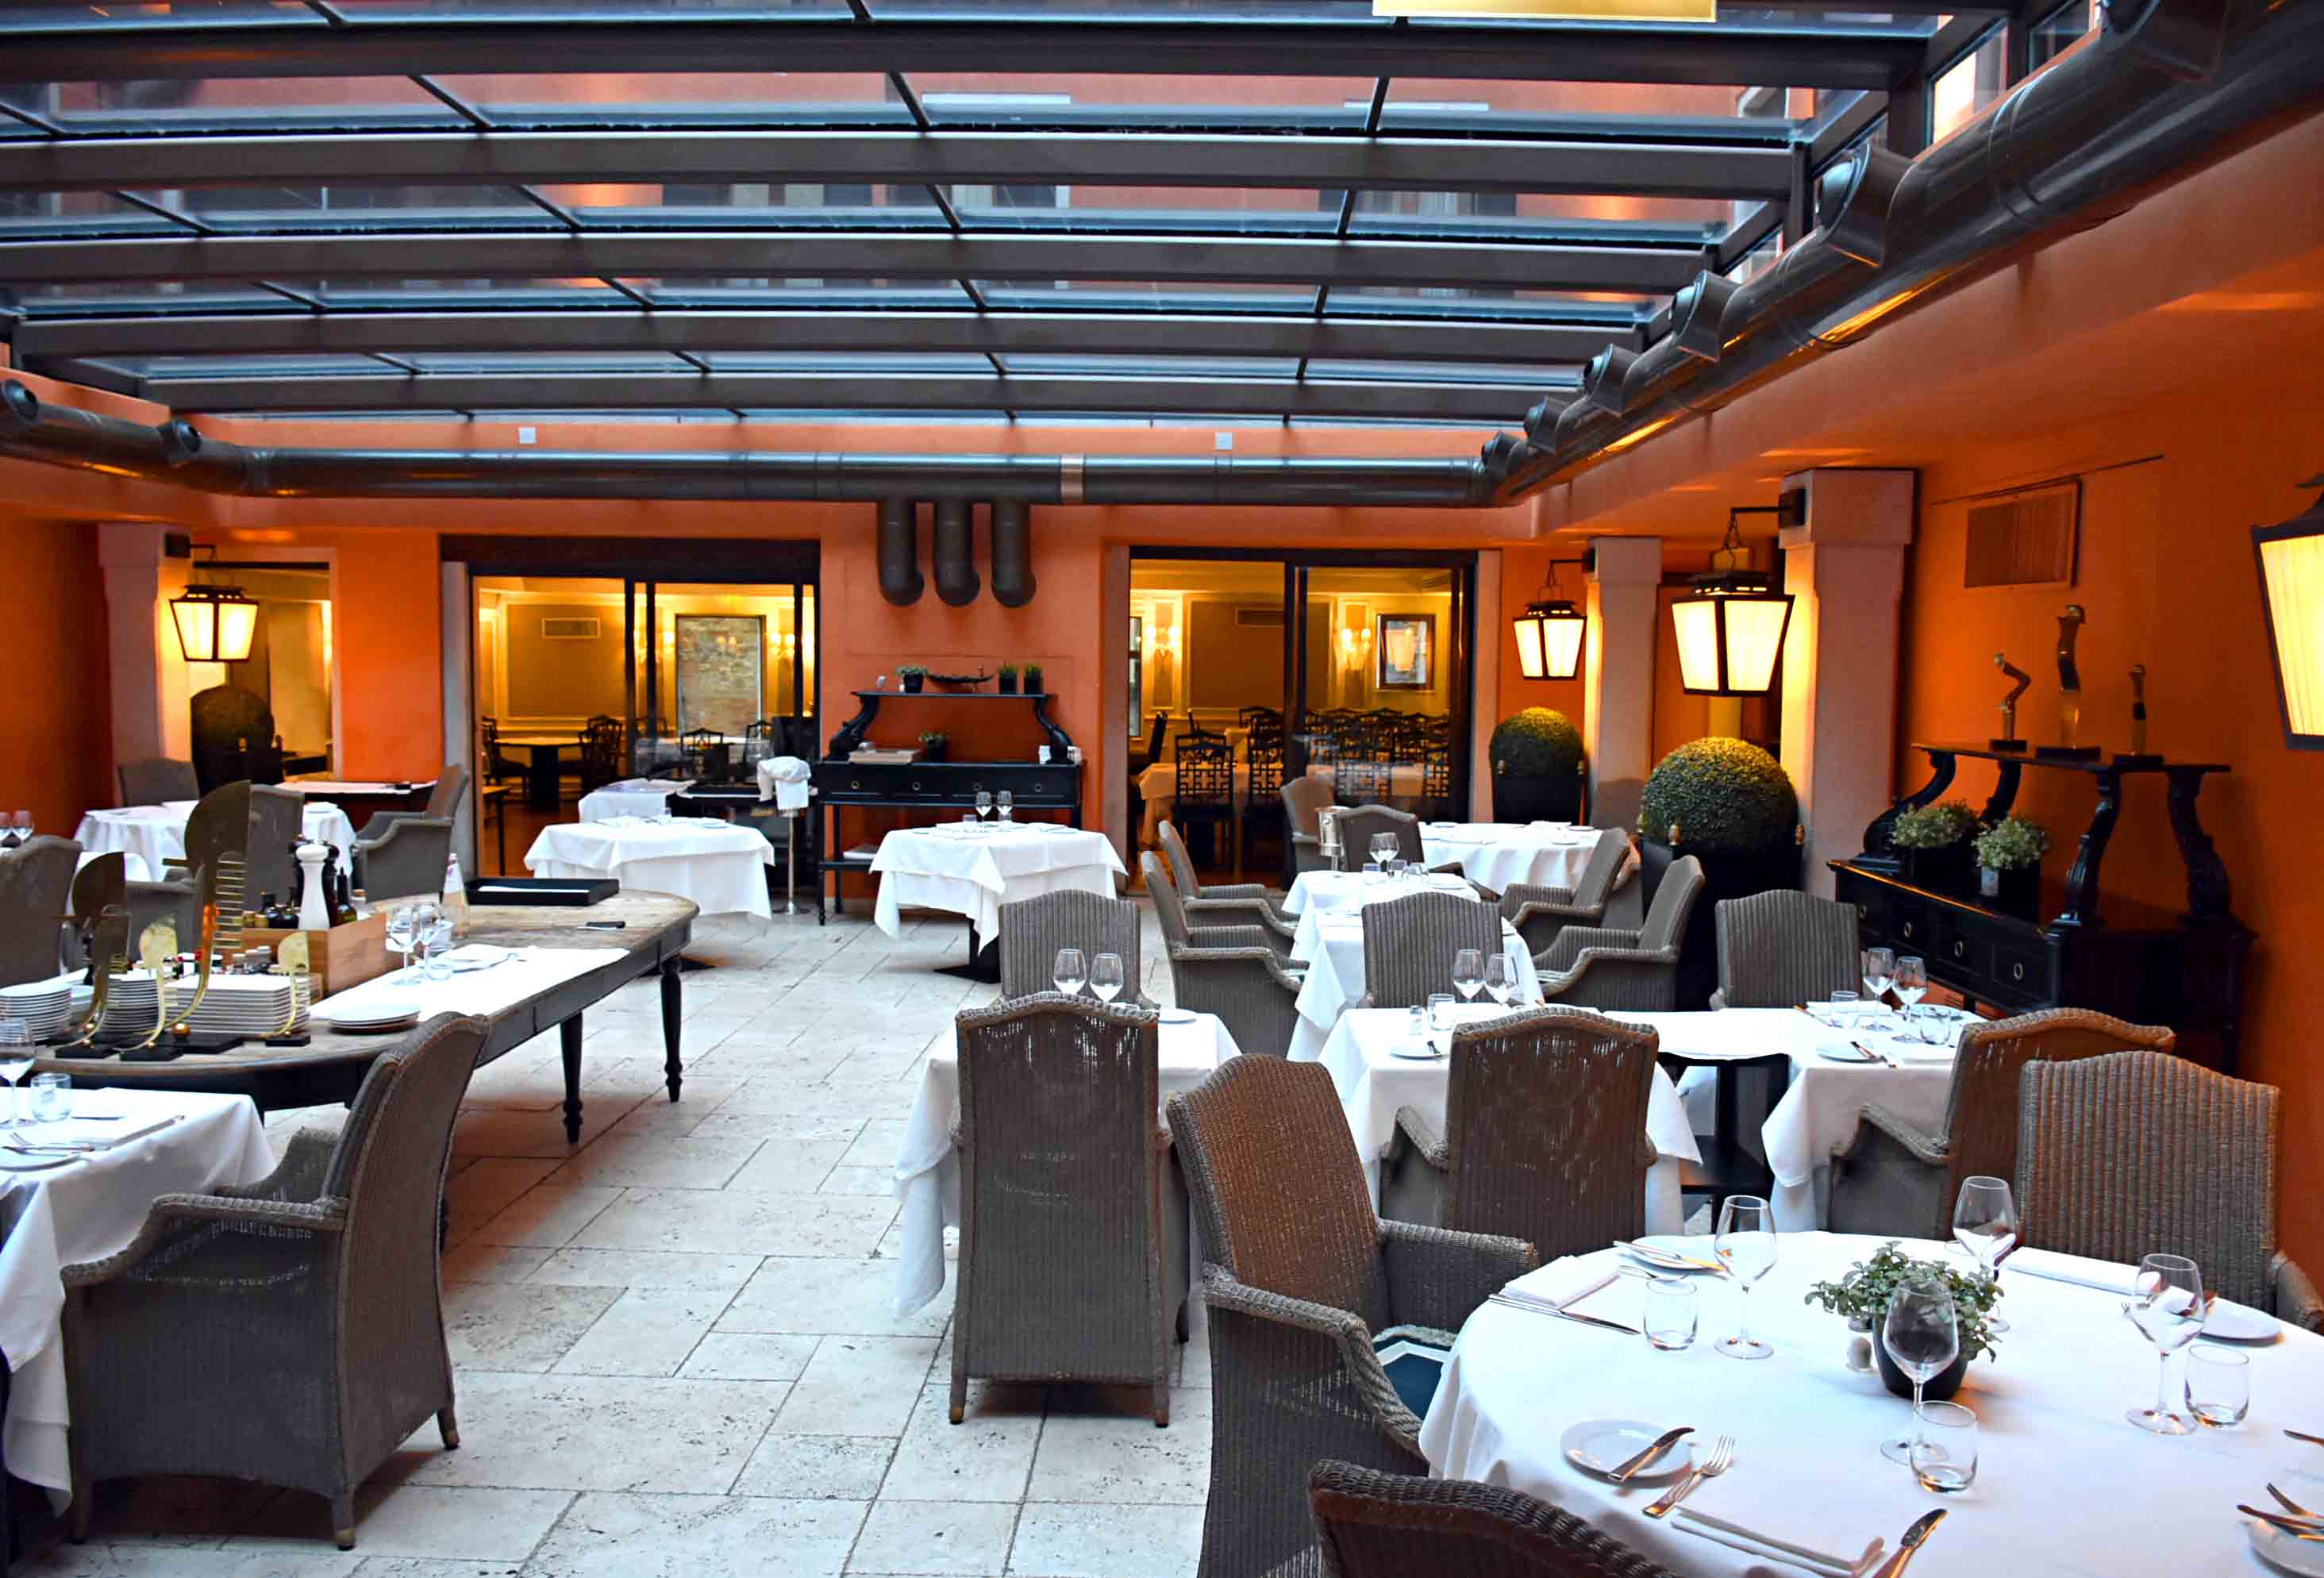 Le Maschere Restaurant Review: Authentic Venetian Dining at the Splendid Hotel in Venice